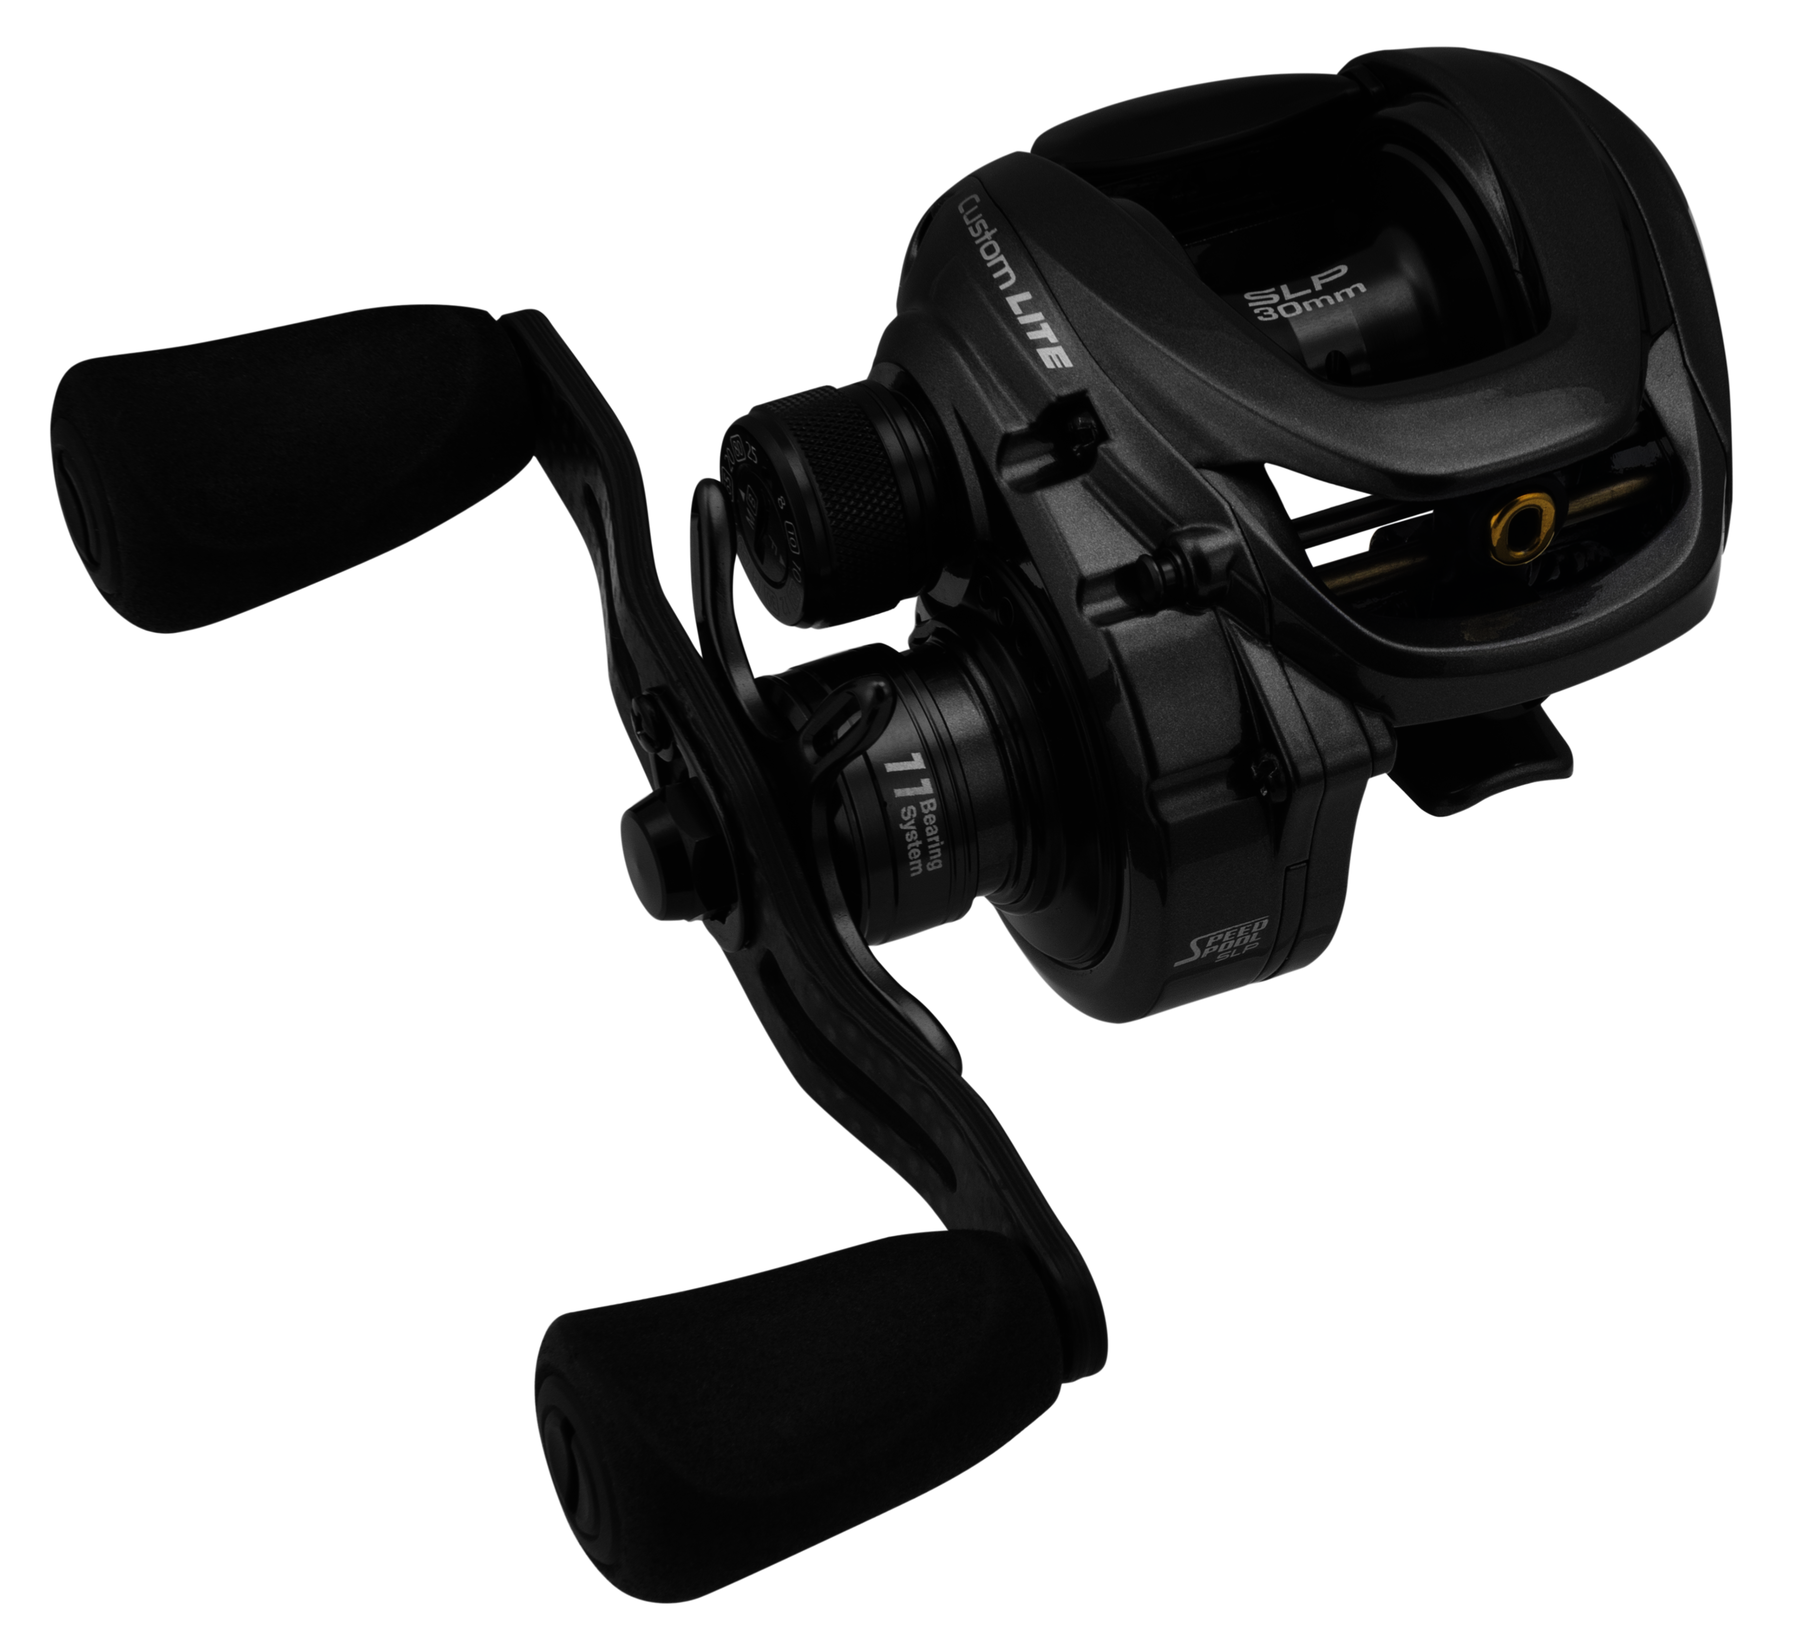 How to Oil a Baitcasting Reel 